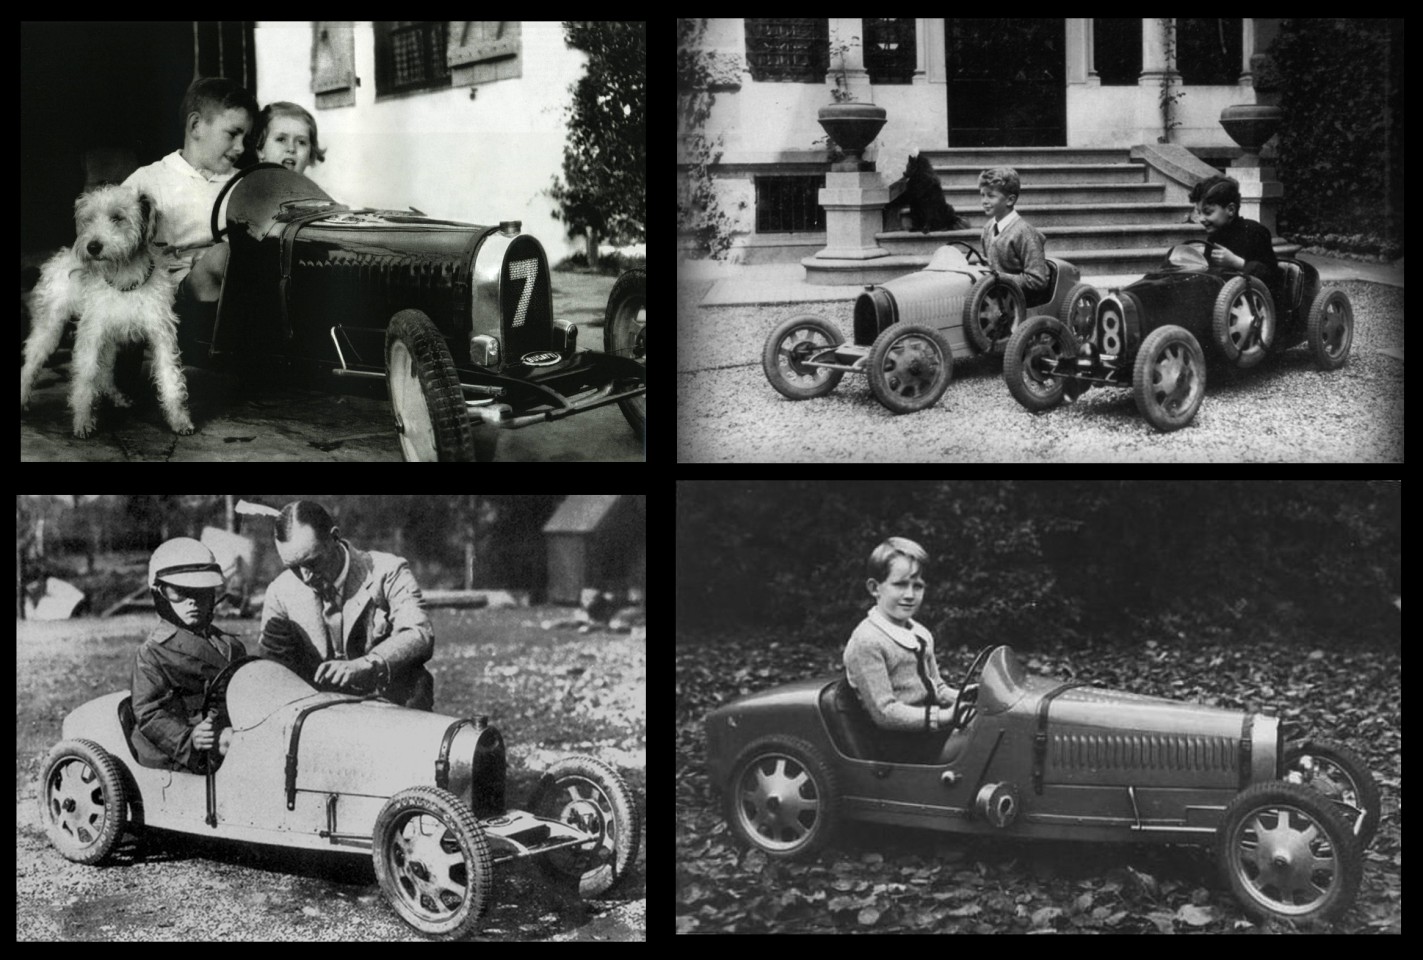 The Bugatti Baby became the ultimate status symbol for children. Every parent wants the best for their child, and the world's most influential people are no different. Newspapers across the world ran images of the children of the wealthy with their new Bugatti babys. Top left: John "Jackie" Forrest Greene pictured with his sister and Bugatti Baby “No. 14”. Jackie was the son of Argentina-born Englishman Eric Forrest Greene, who won the 1928 500 Millas Argentinas race in a Bugatti Type 35. Jackie would go on to emulate the deeds of his father in South American racing after WW2. Top Left: Gianni Agnelli and friends with their new Bugatti Babys circa 1929. Agnelli became a noted playboy whose mistresses included Pamela Harriman, Jackie Kennedy and Anita Ekberg, before becoming a Captain of Industry. As the head of automaker FIAT, he once controlled 4.4% of Italy's GDP and 3.1% of its workforce. Bottom left: Donald Campbell and his new Bugatti Baby, with loving father Sir Malcolm Campbell. Donald broke eight absolute world speed records on water and on land in the 1950s and 1960s. He remains the only person to set both world land and water speed records in the same year (1964). Bottom right: Prince Baudouin of Belgium with his yellow Bugatti Baby.